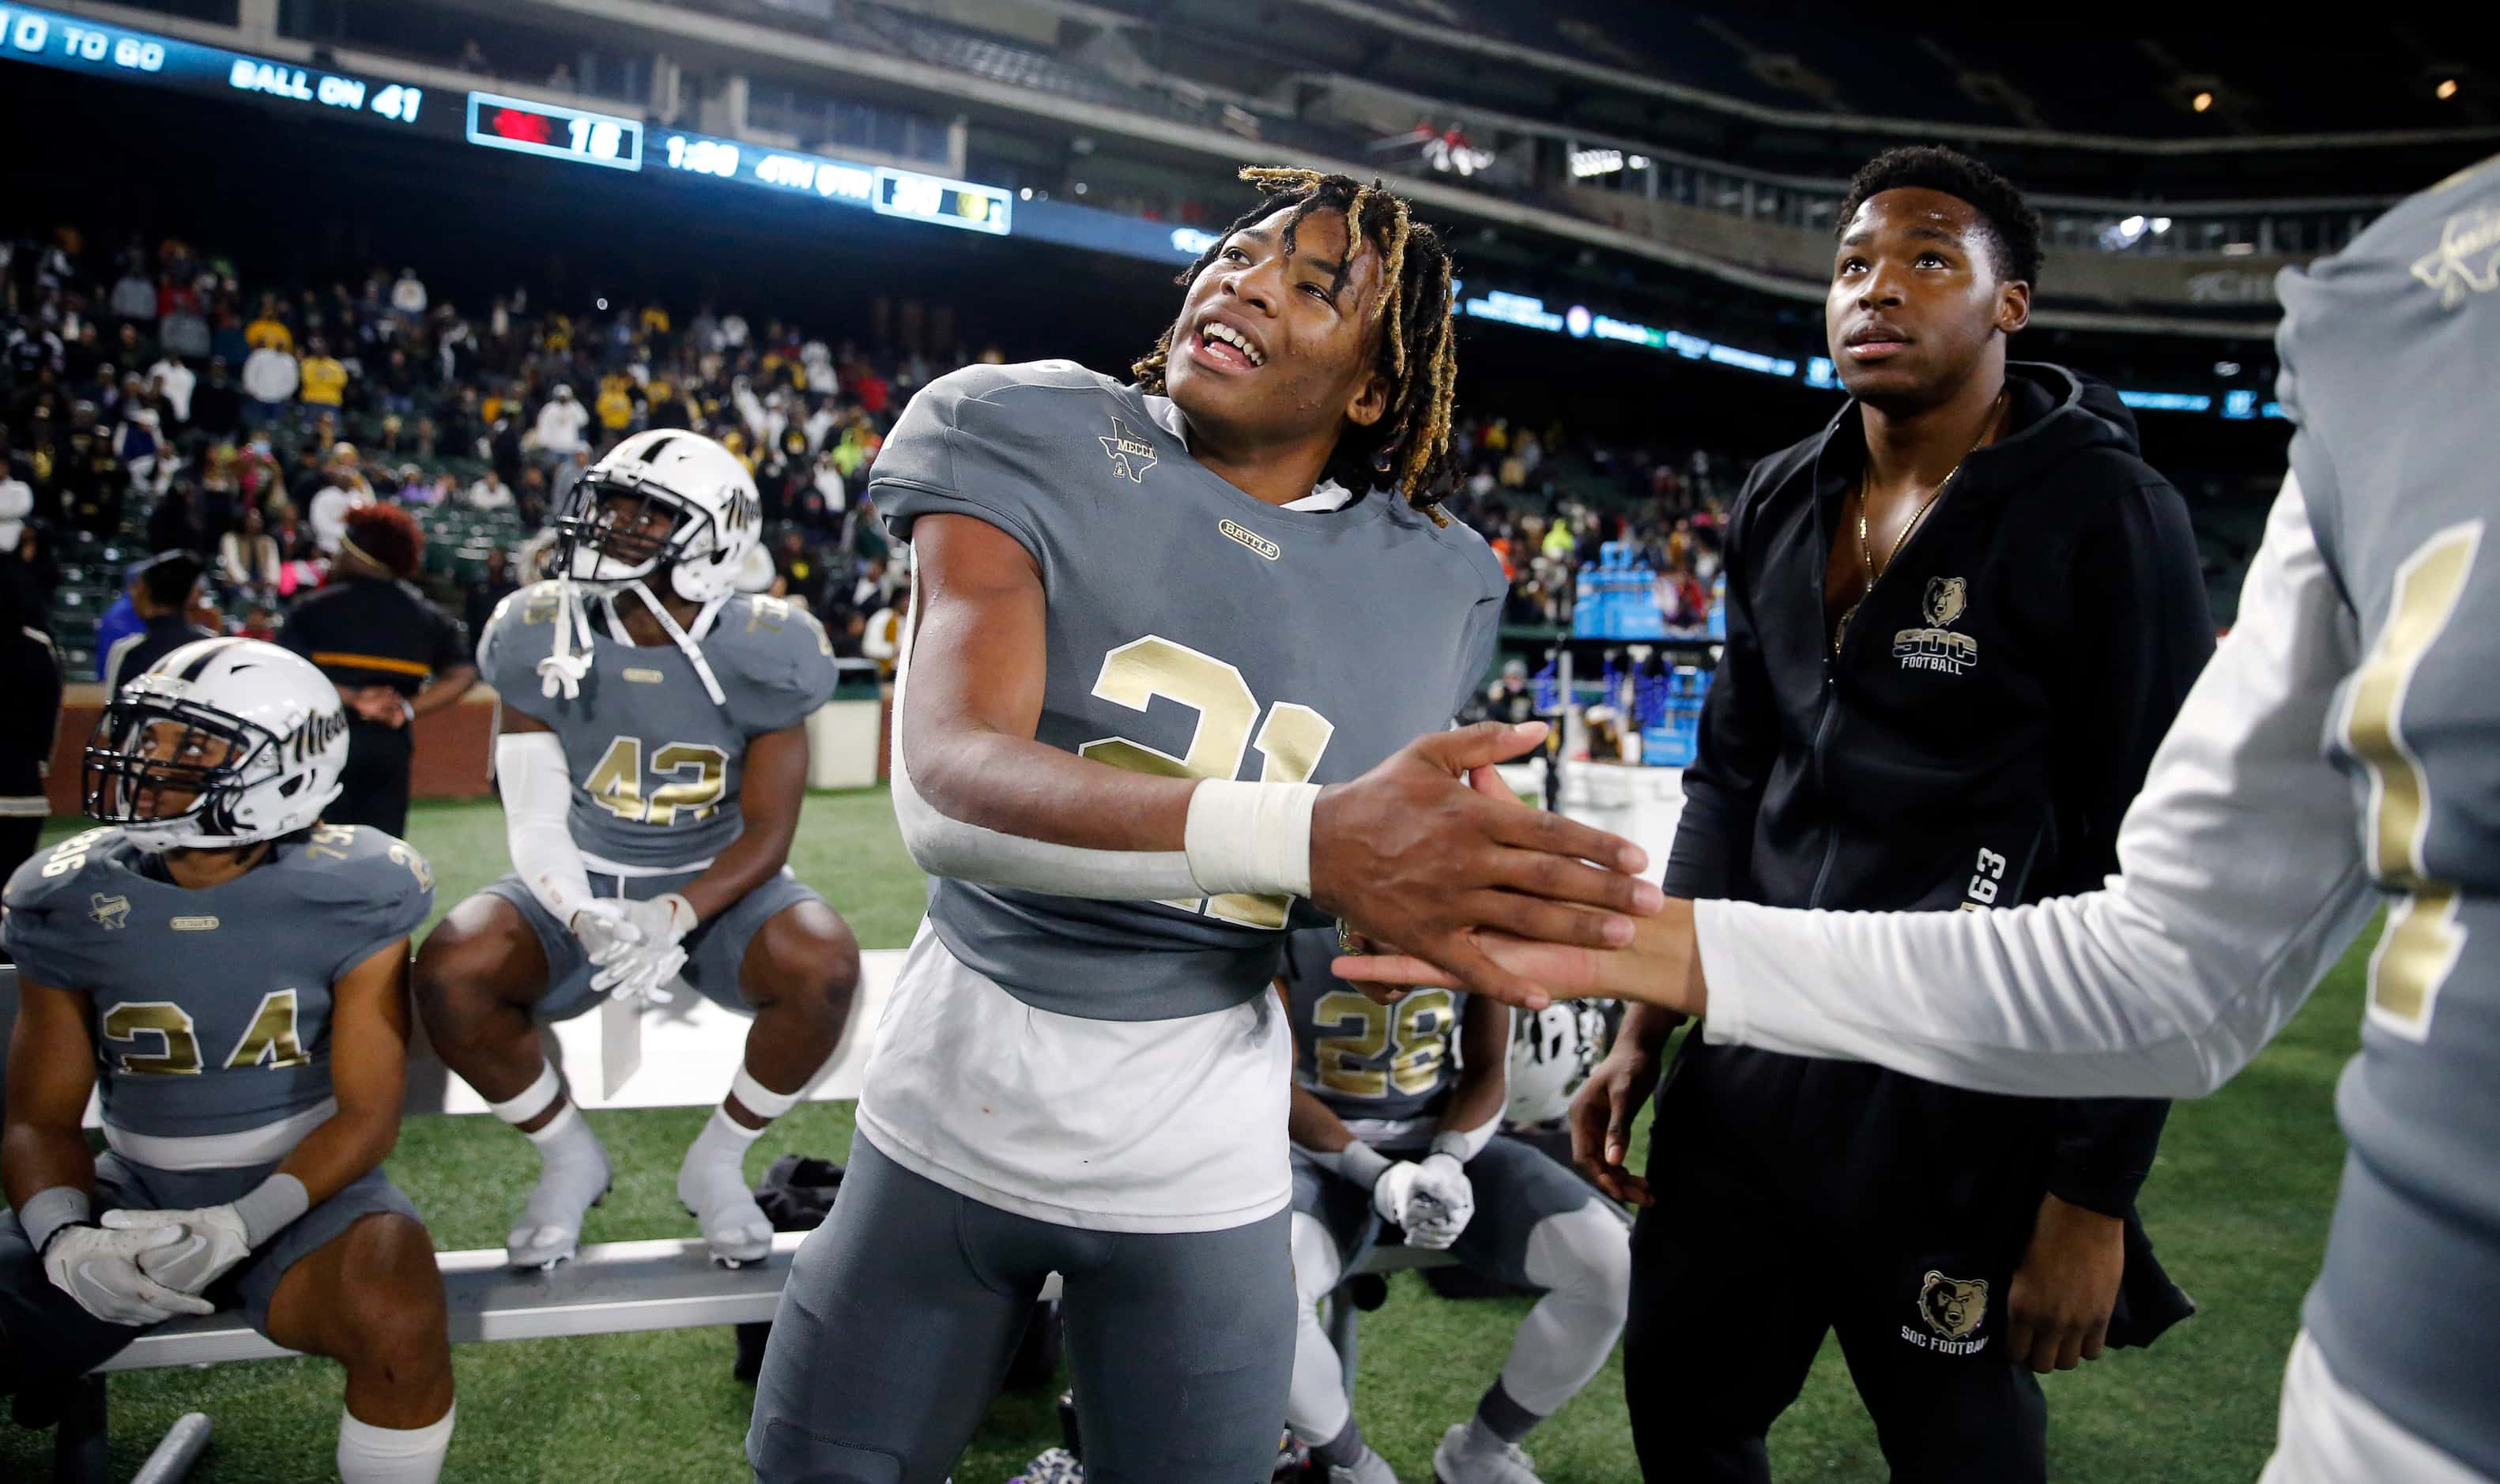 South Oak Cliff running back Danny Green (21) is congratulated on the win as the team...